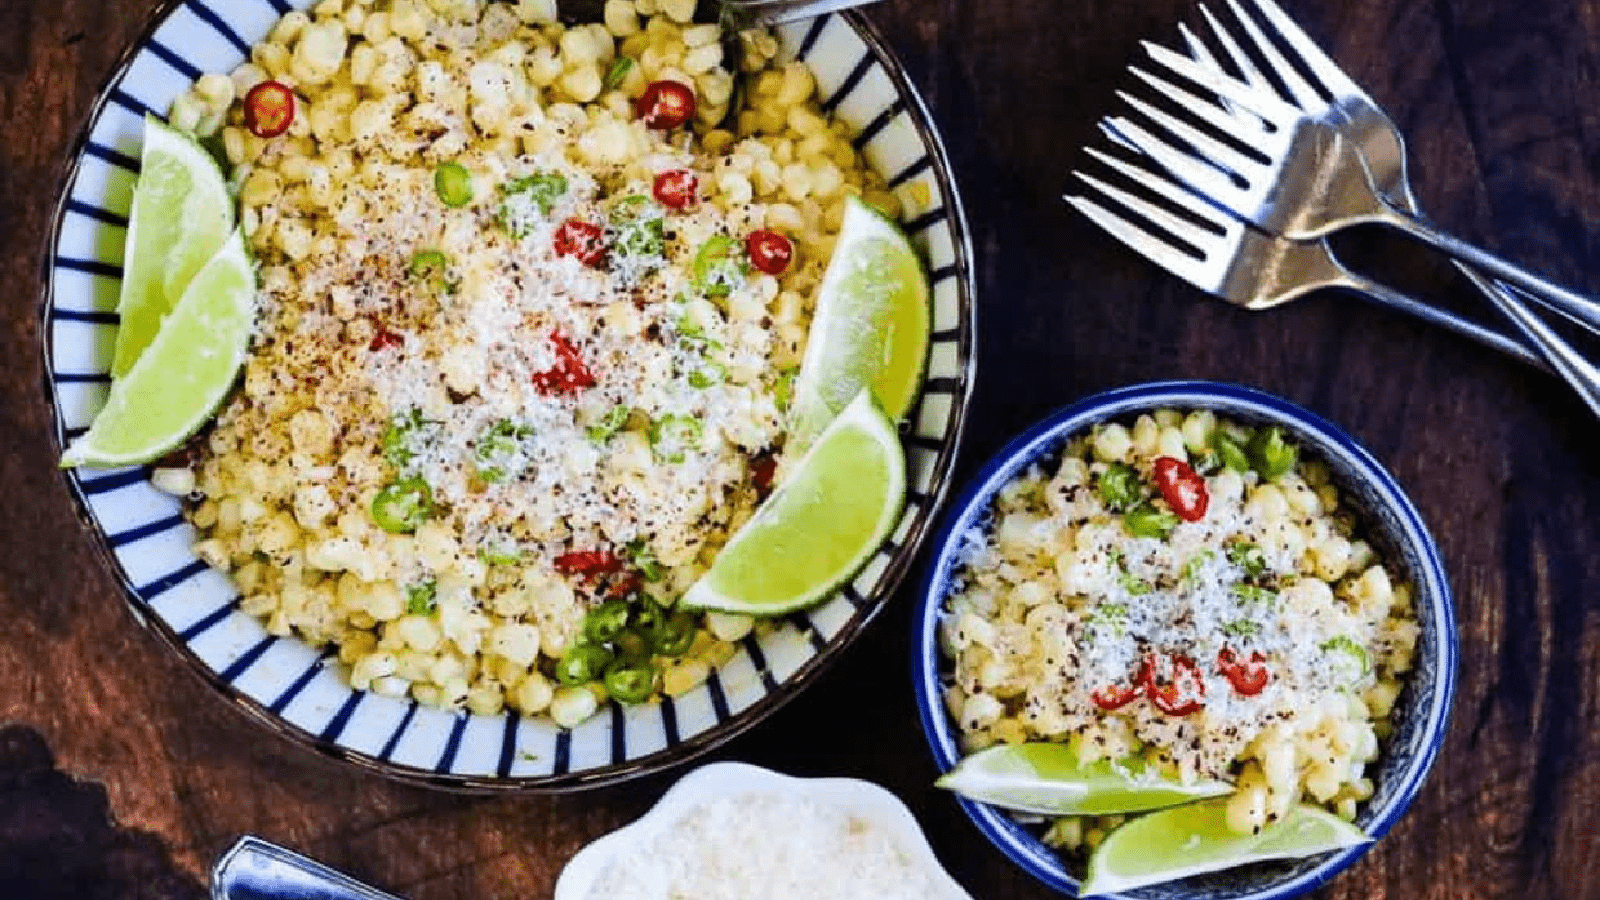 Mexican corn salad in bowls, garnished with parmesan cheese and lime wedges, with forks on the side.